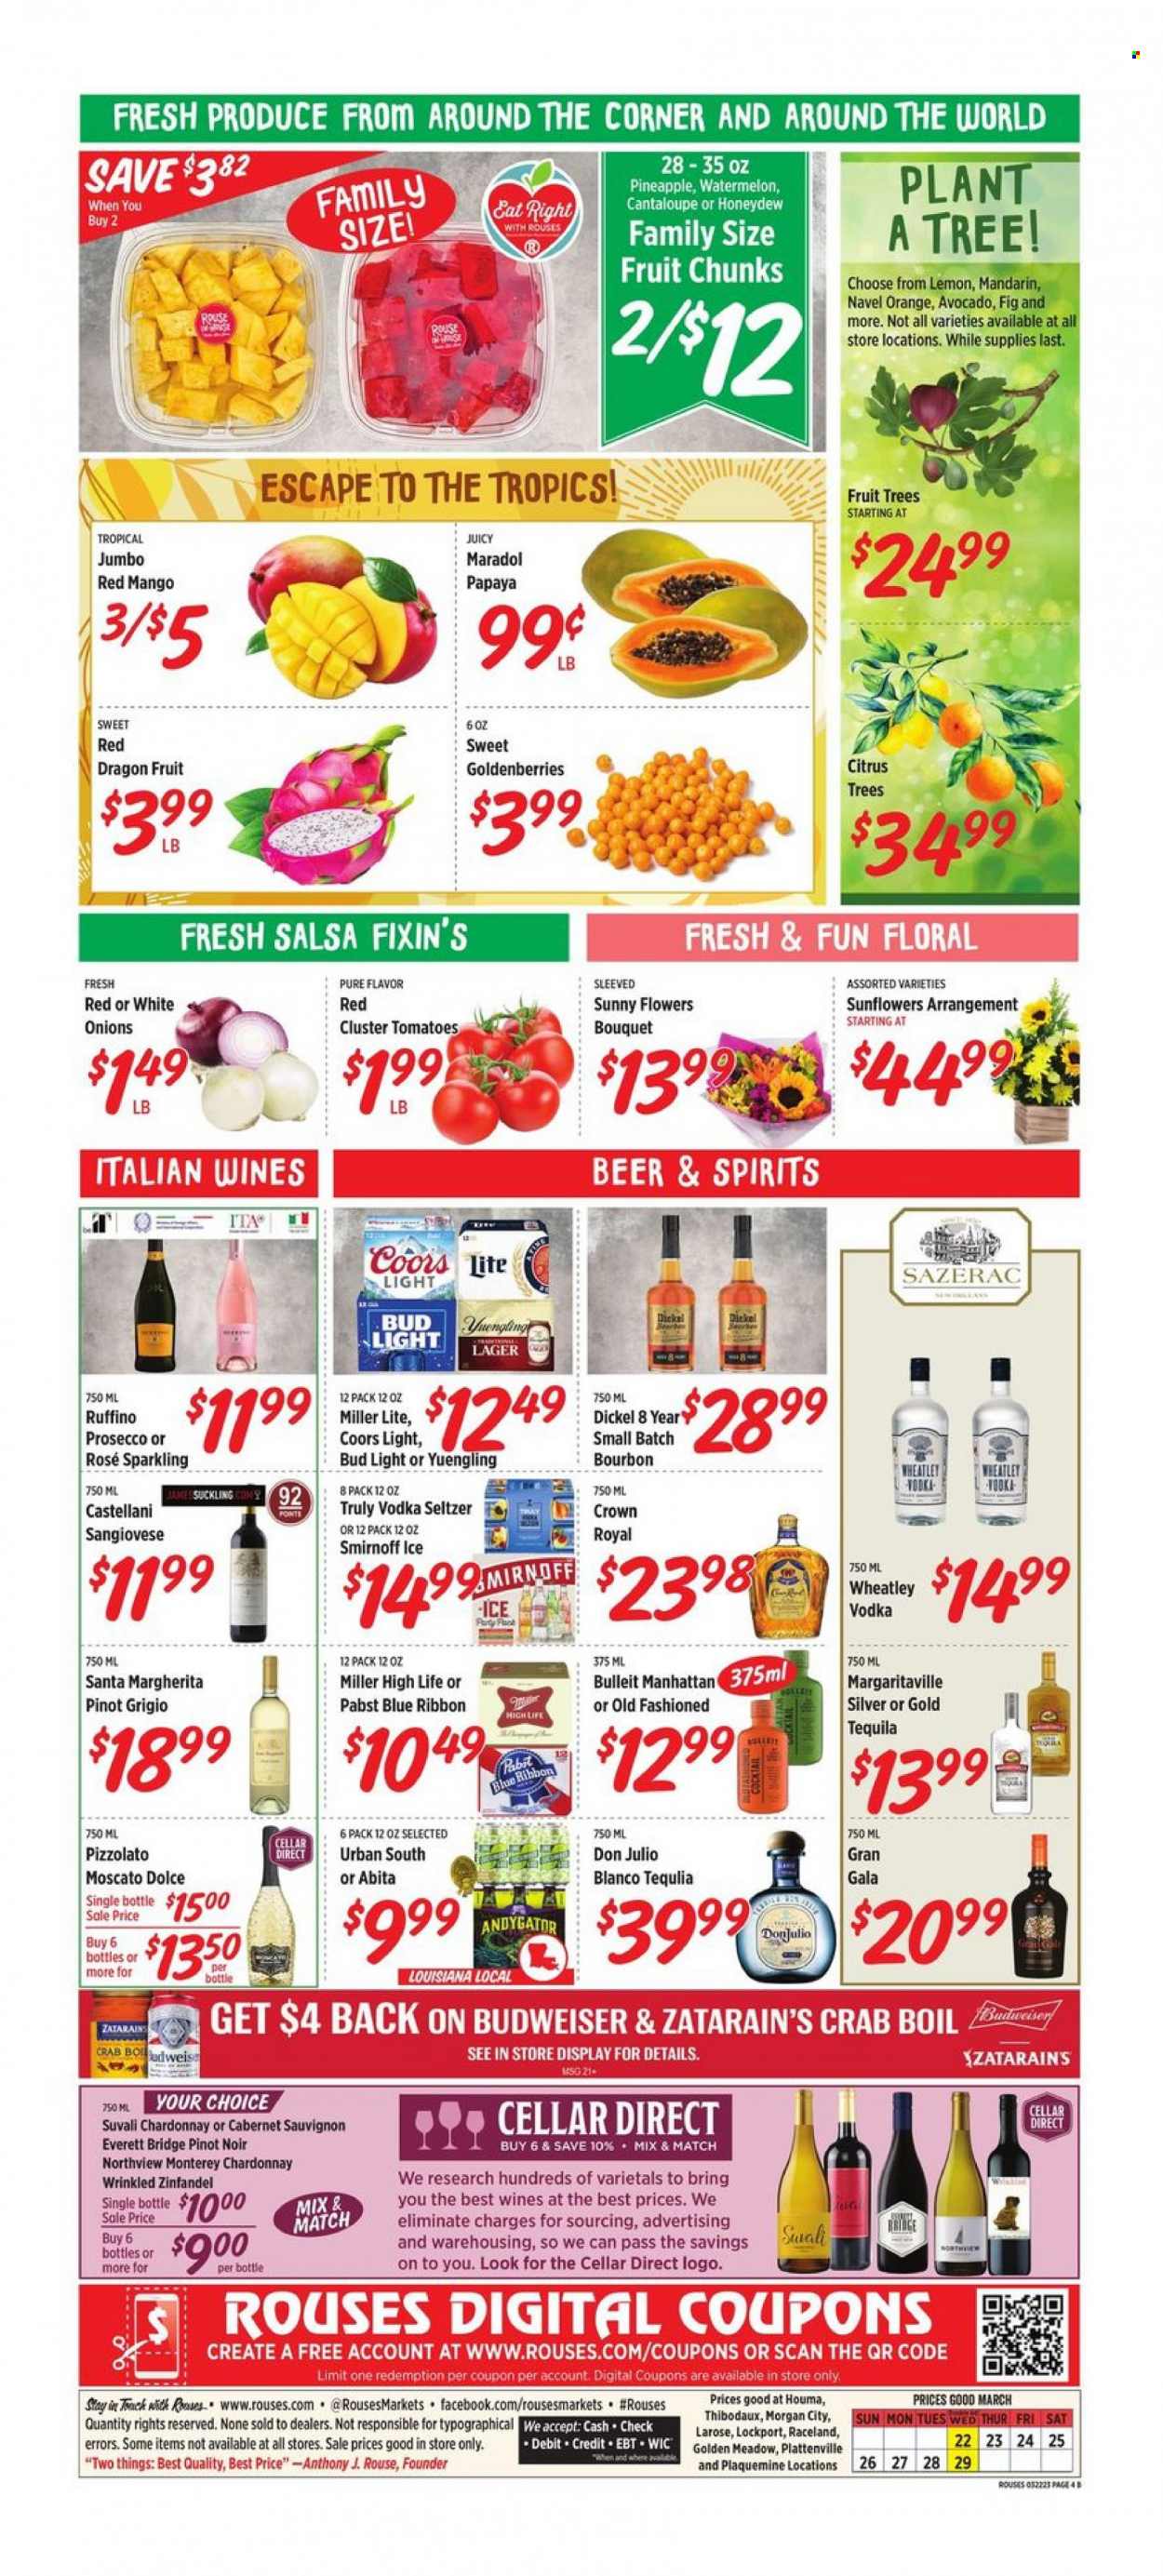 Rouses Markets ad  - 03.22.2023 - 03.29.2023.